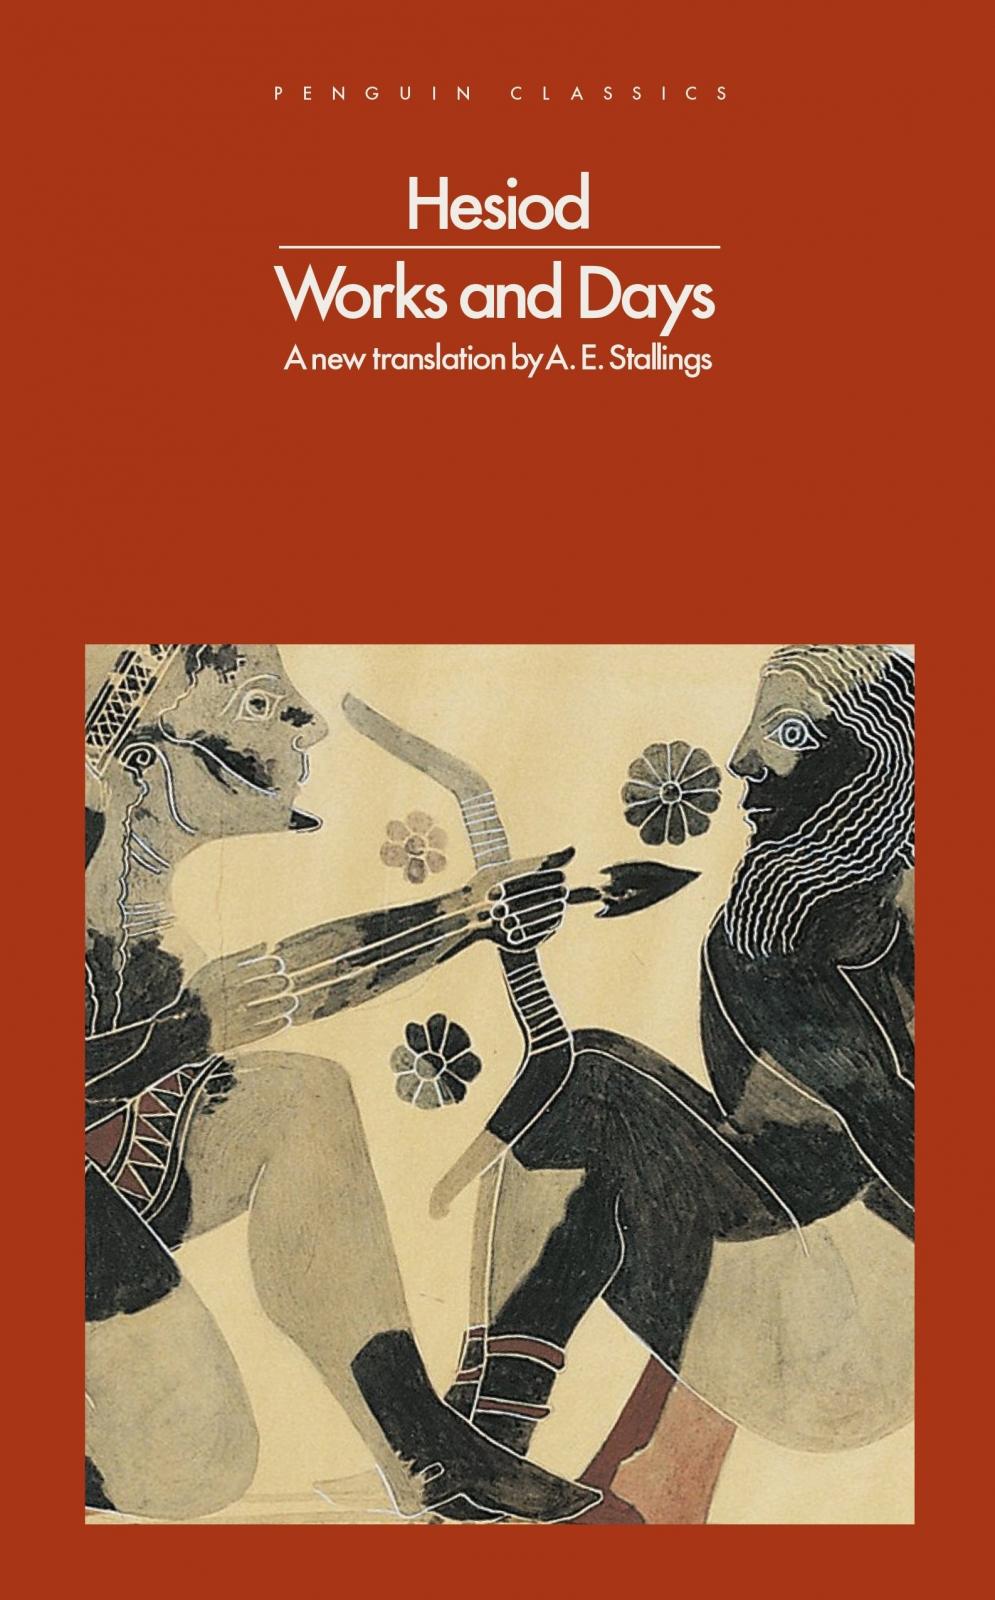 Alicia E. Stallings translation of Hesiod's Works and Days for @PenguinClassics	